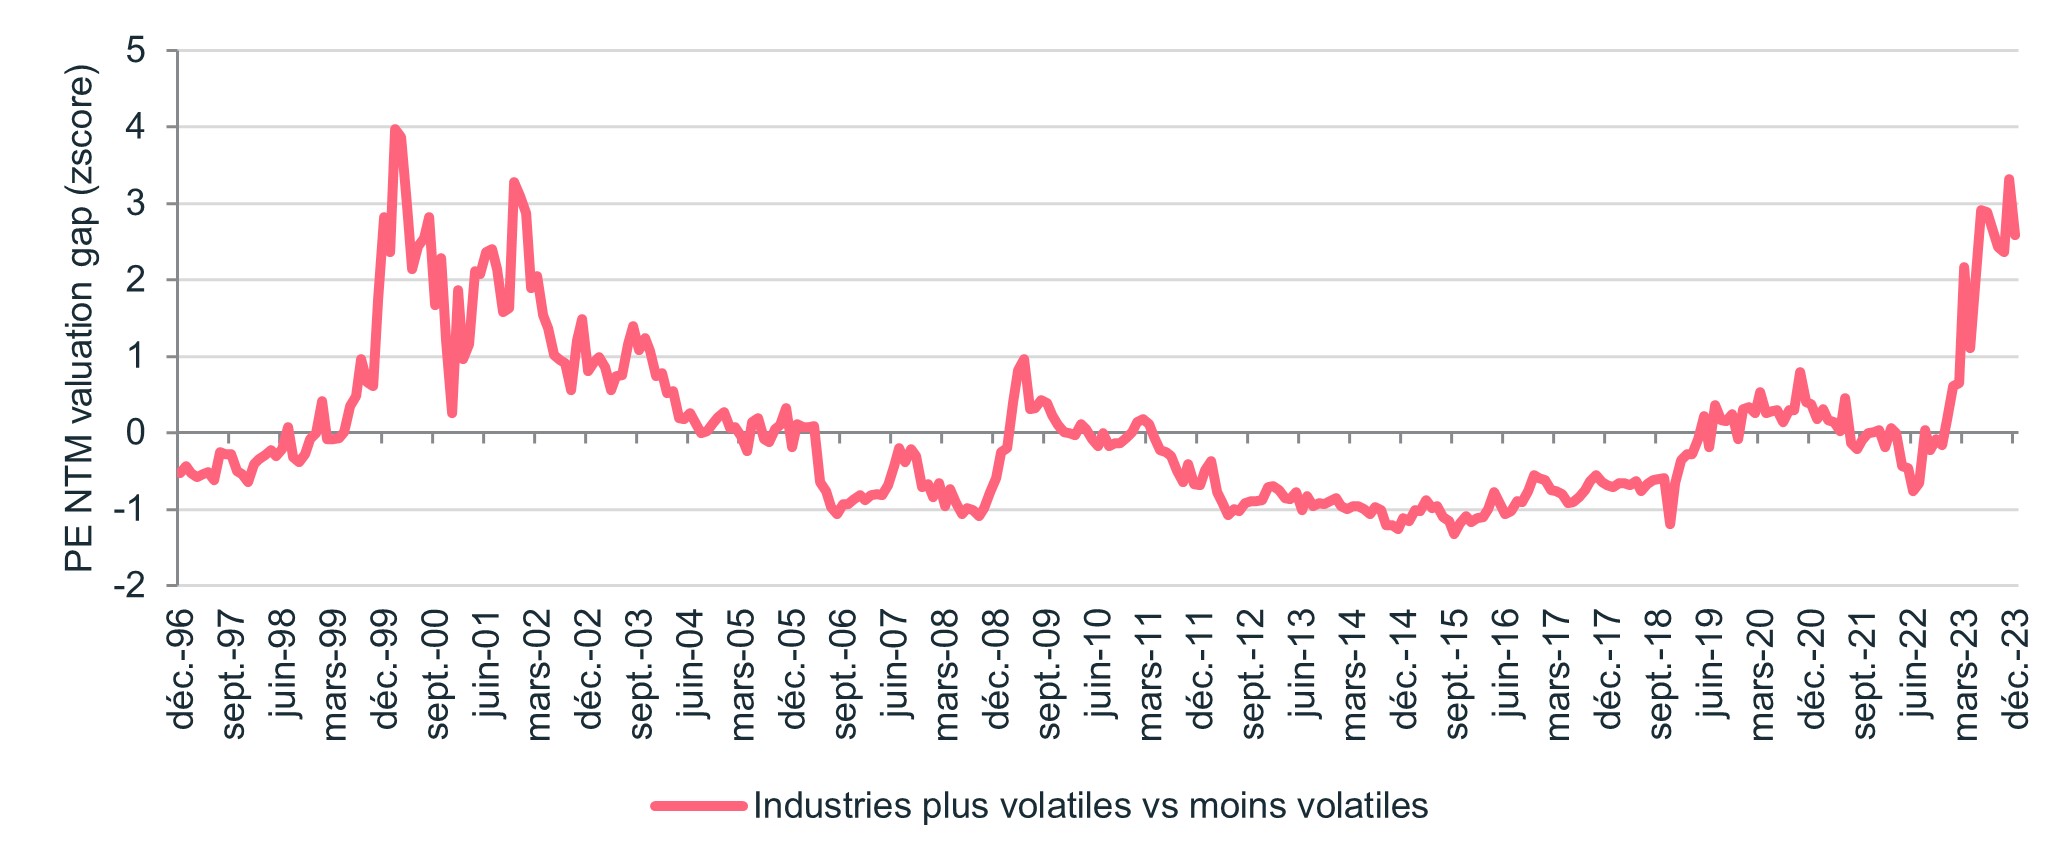 valuation-spreads-12-month-forward-pe-most-volatile-industries-vs-least-volatile-industries-msci-ac-world-december-2023